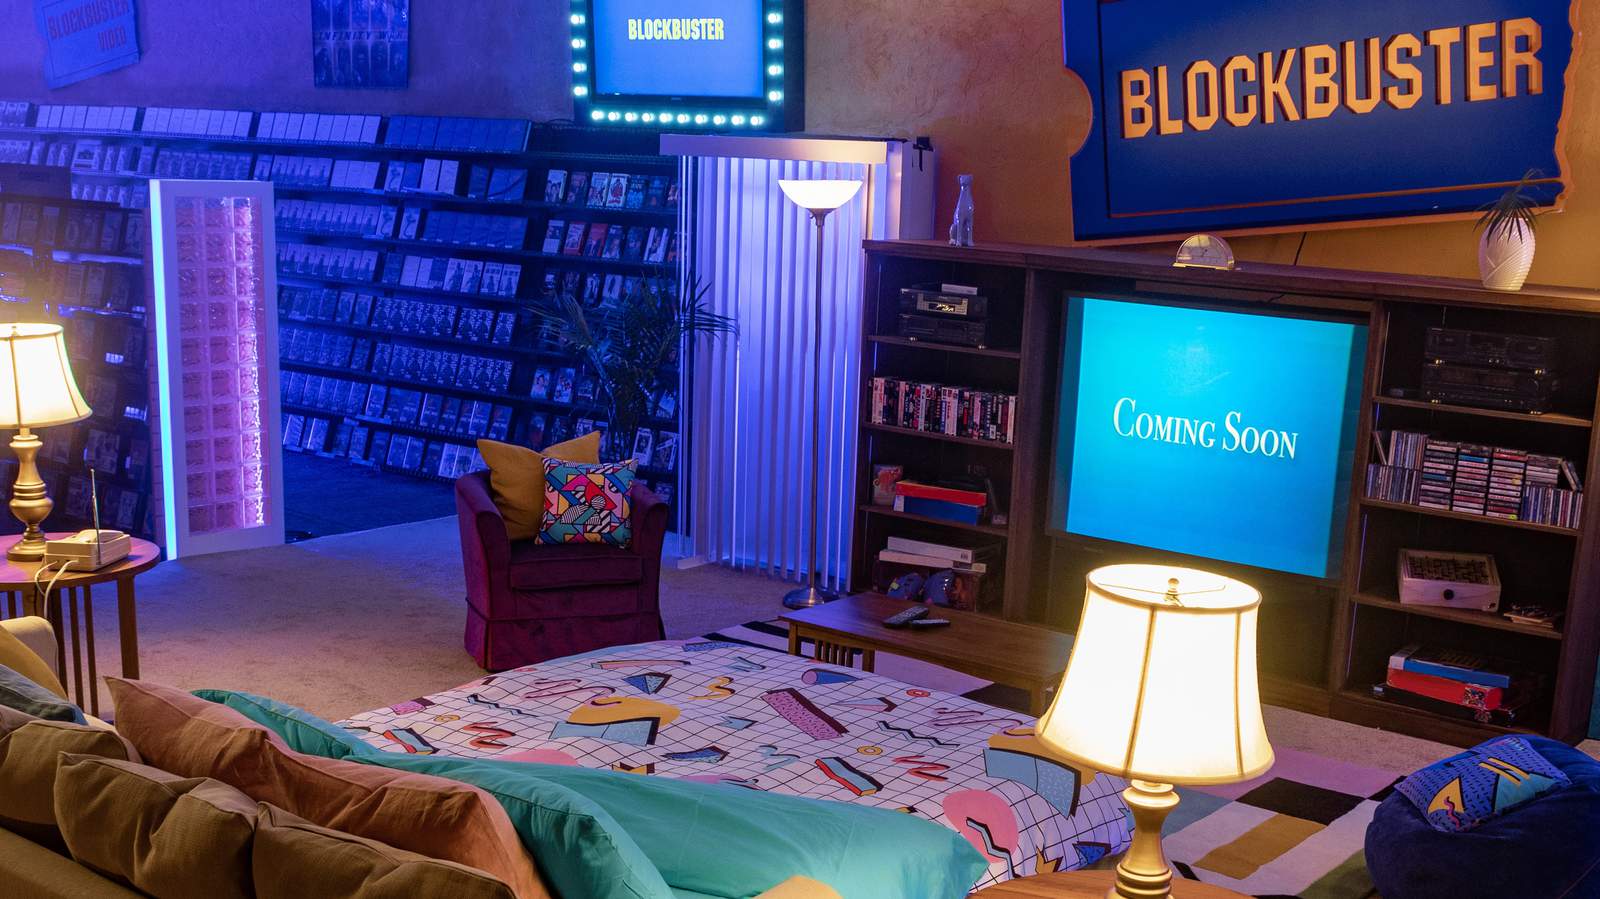 You can have sleepover in world’s last Blockbuster for $4 a night